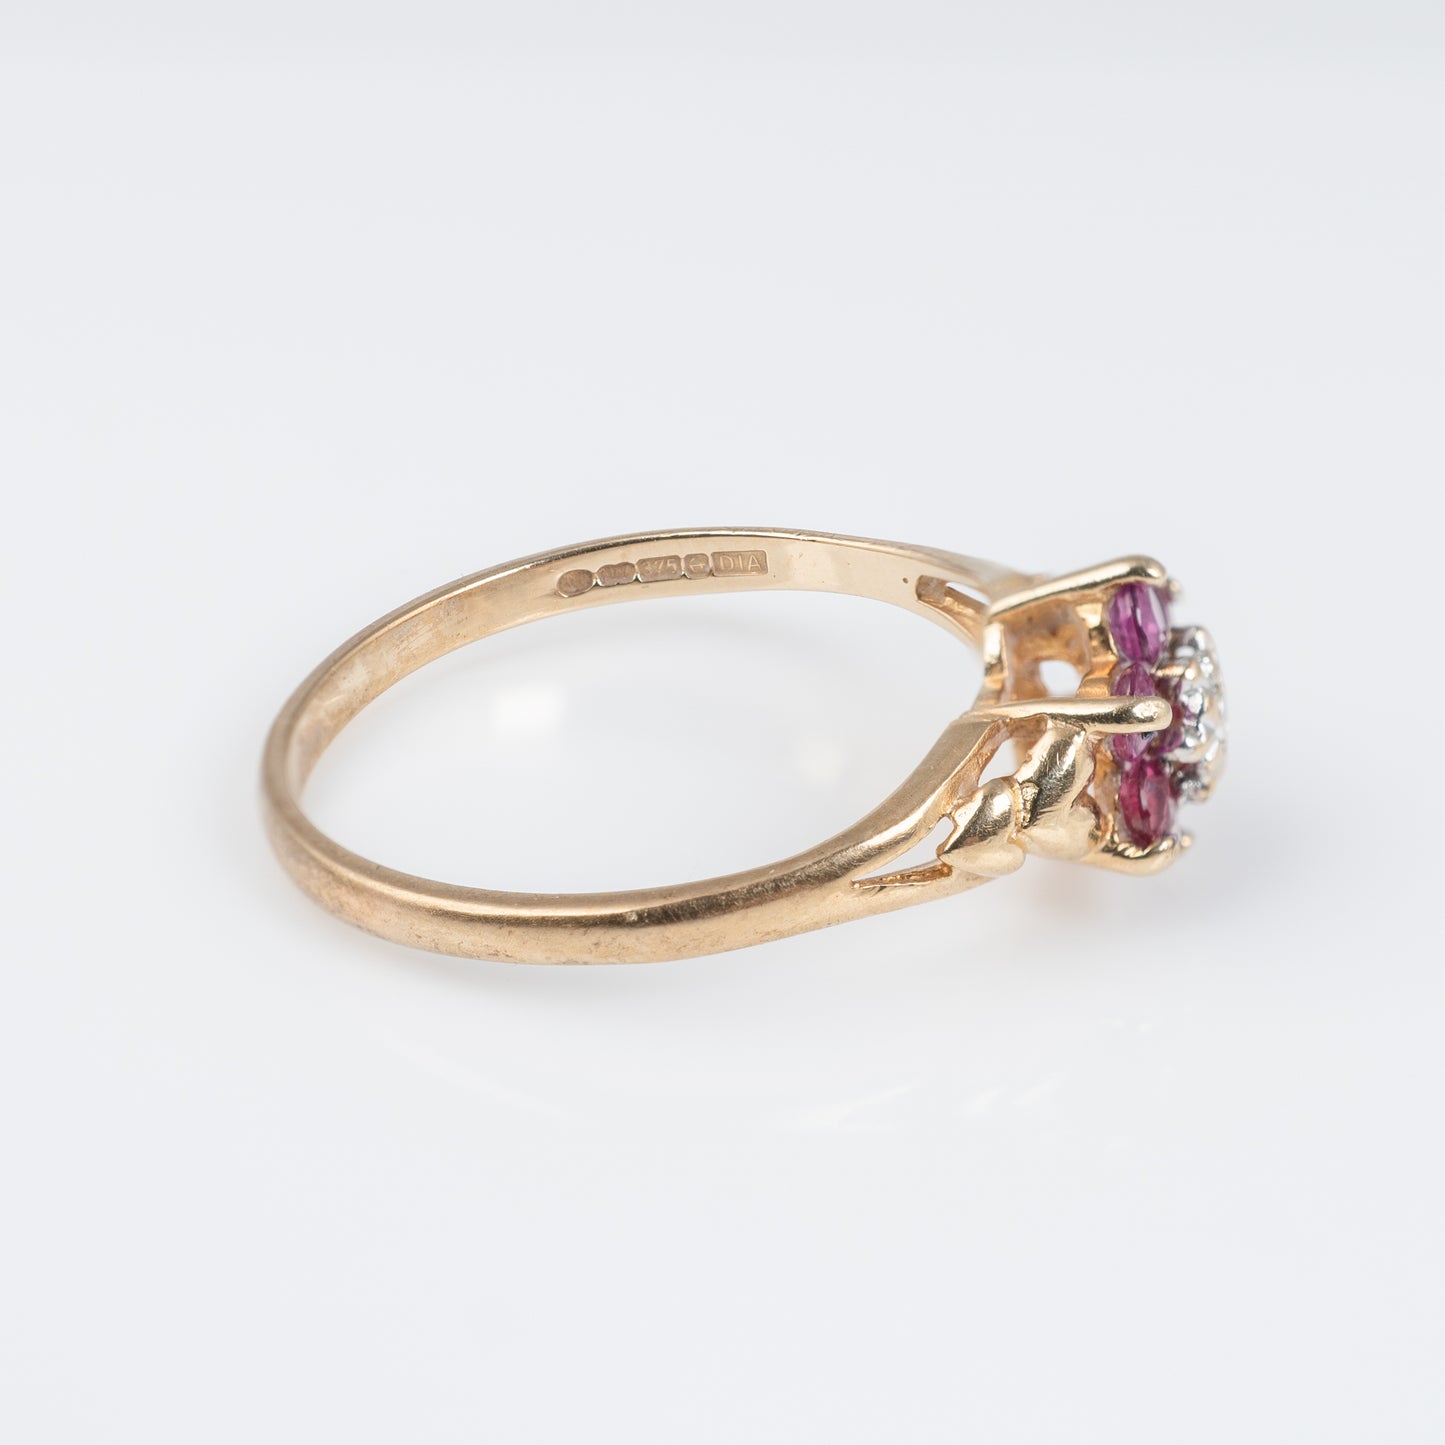 Ruby and Diamond Ring - 9ct Yellow Gold with Heart Motifs